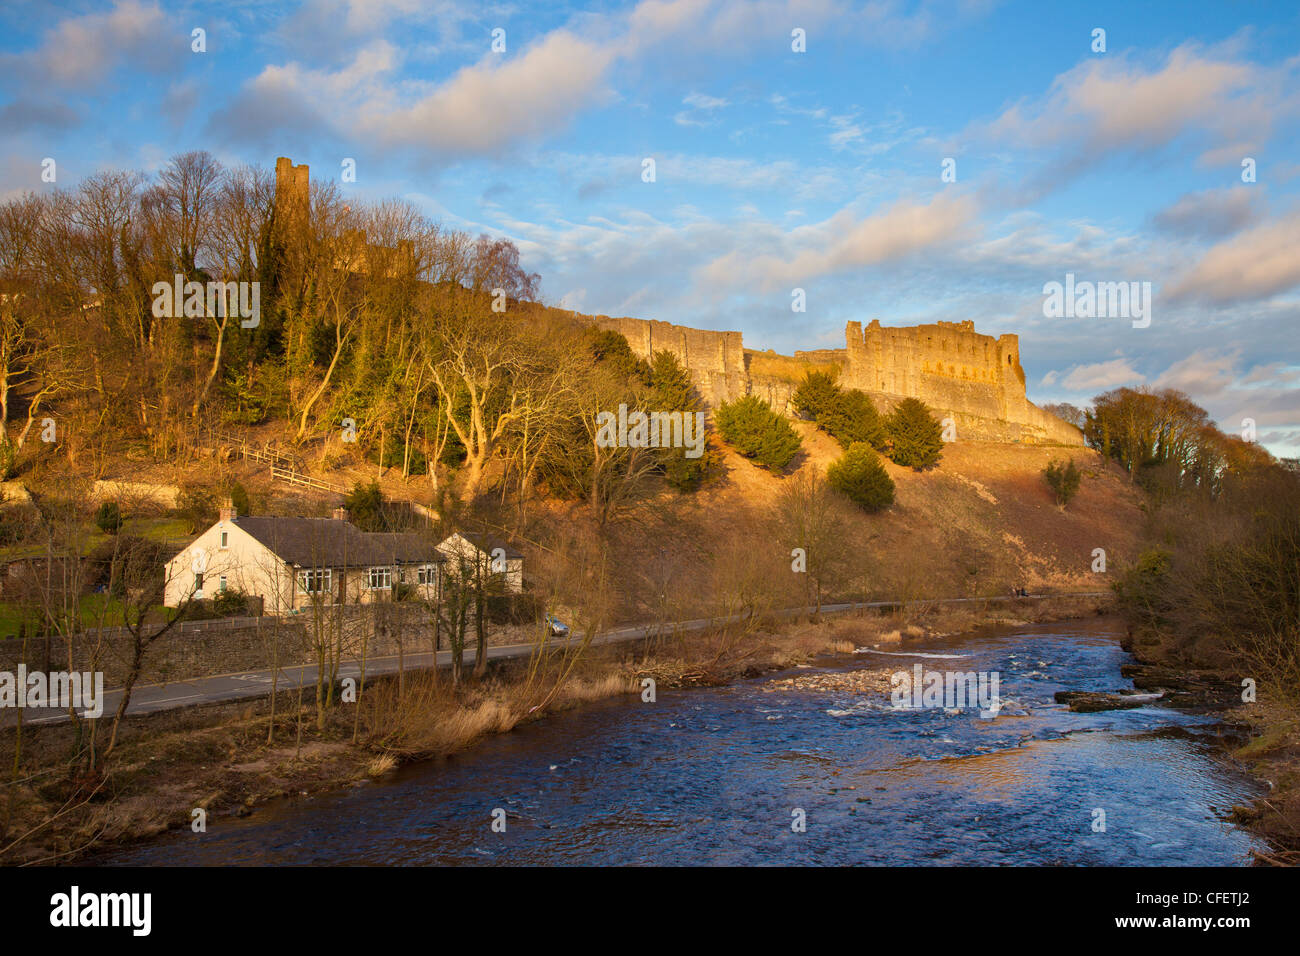 Richmond Castle on the banks of The River Swale near sunset Richmond, Richmondshire, North Yorkshire, UK Stock Photo